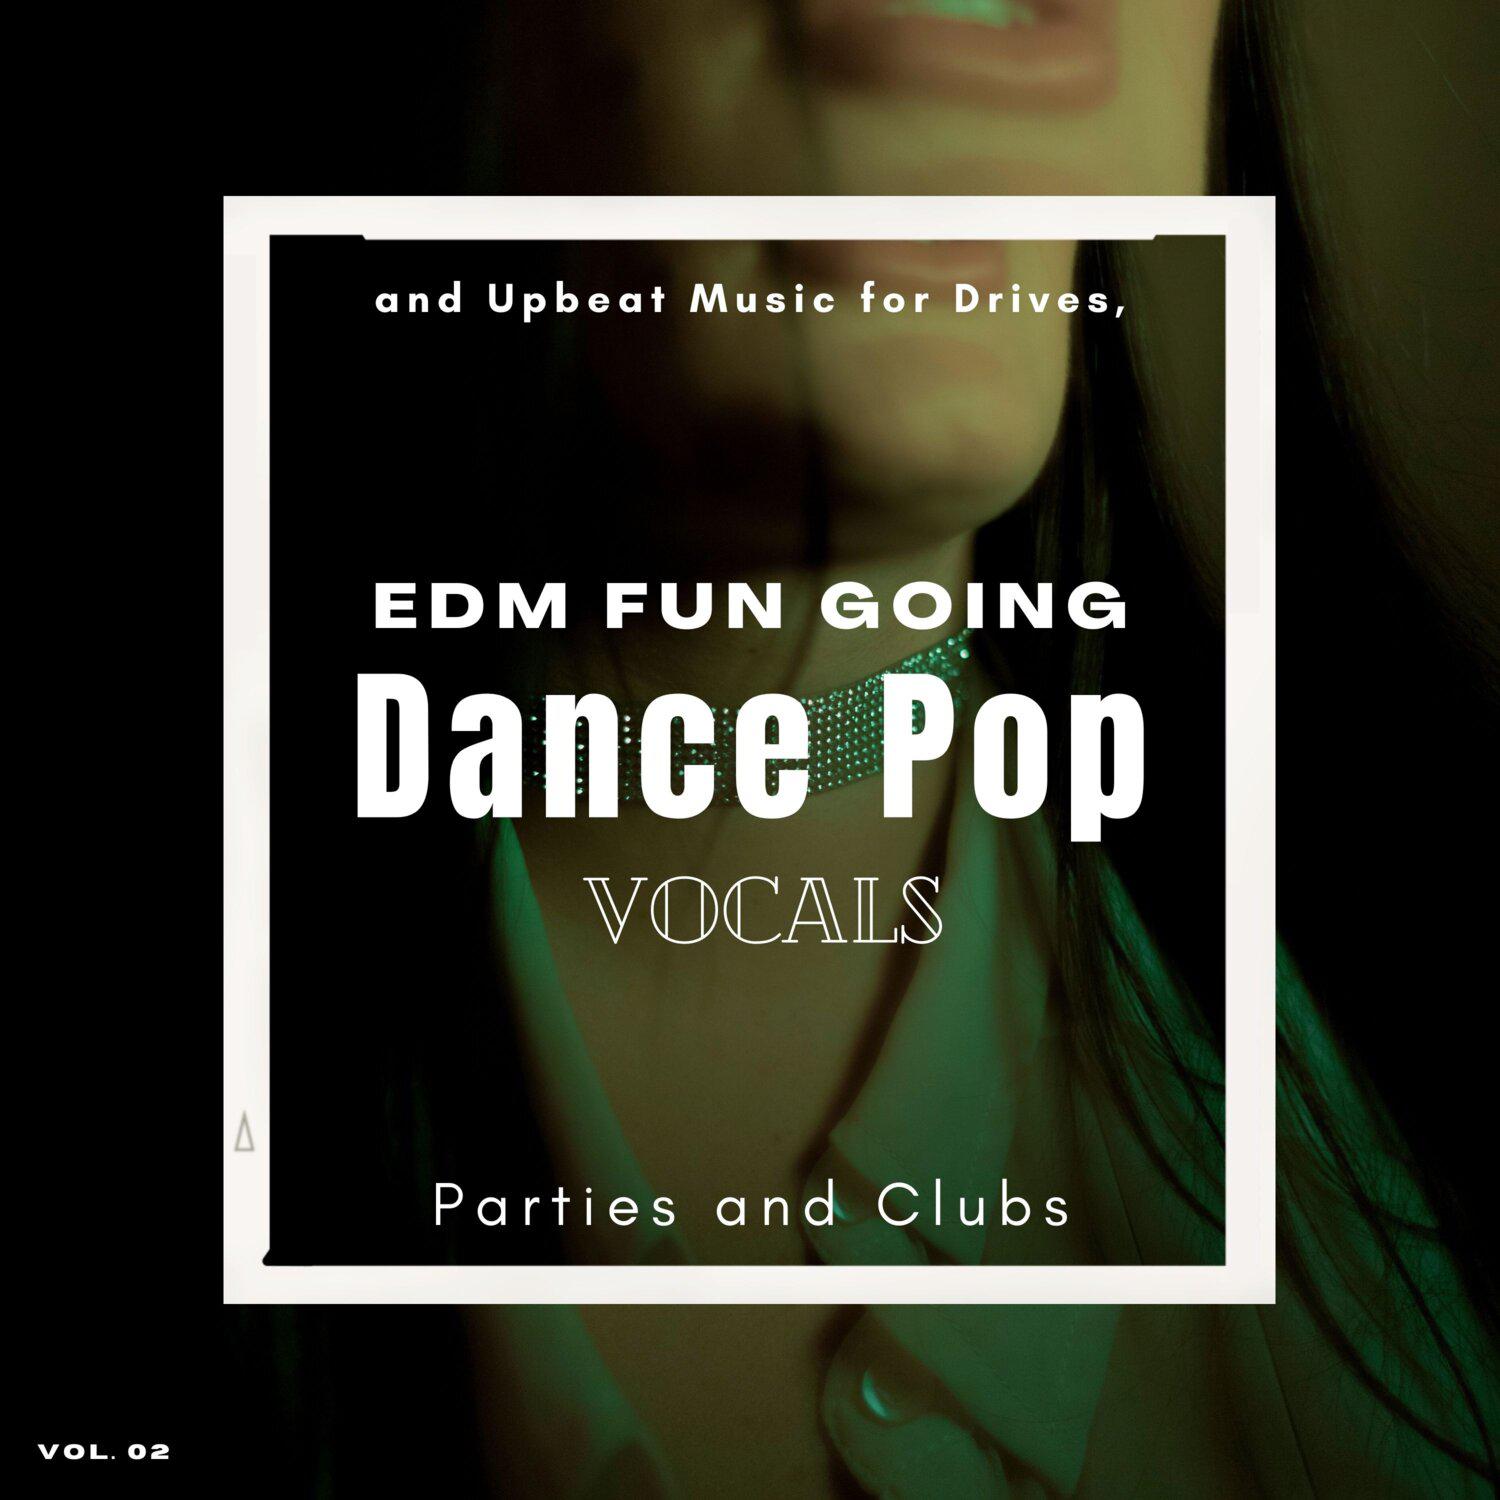 Постер альбома Dance Pop Vocals: EDM Fun Going and Upbeat Music for Drives, Parties and Clubs, Vol. 02